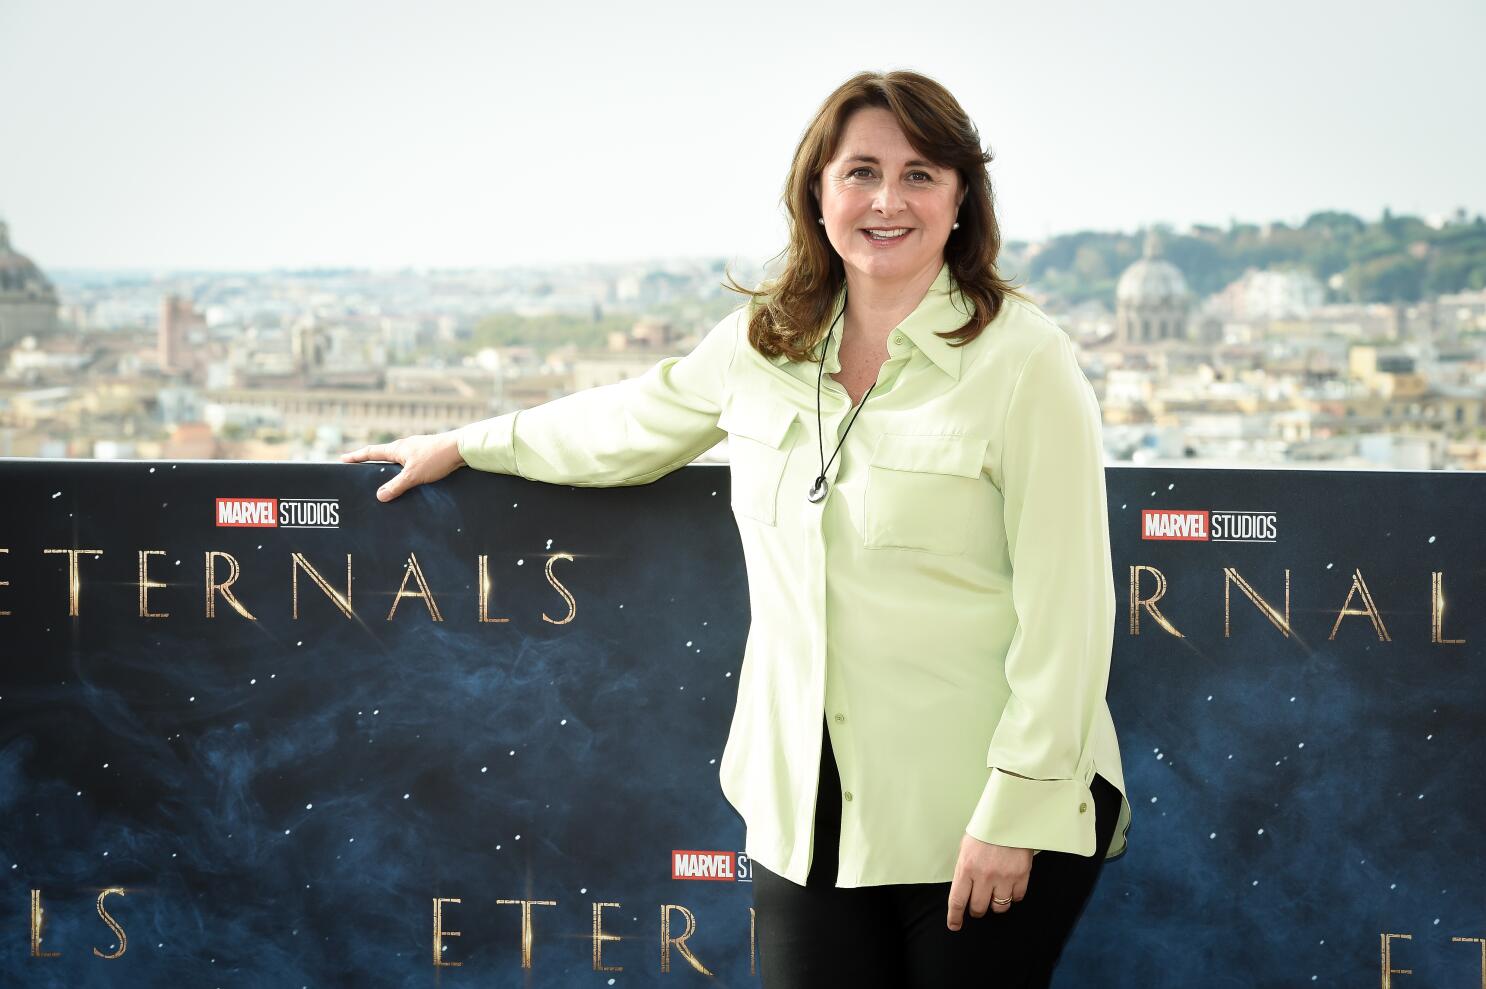 Marvel producer Victoria Alonso leaves studio - Los Angeles Times